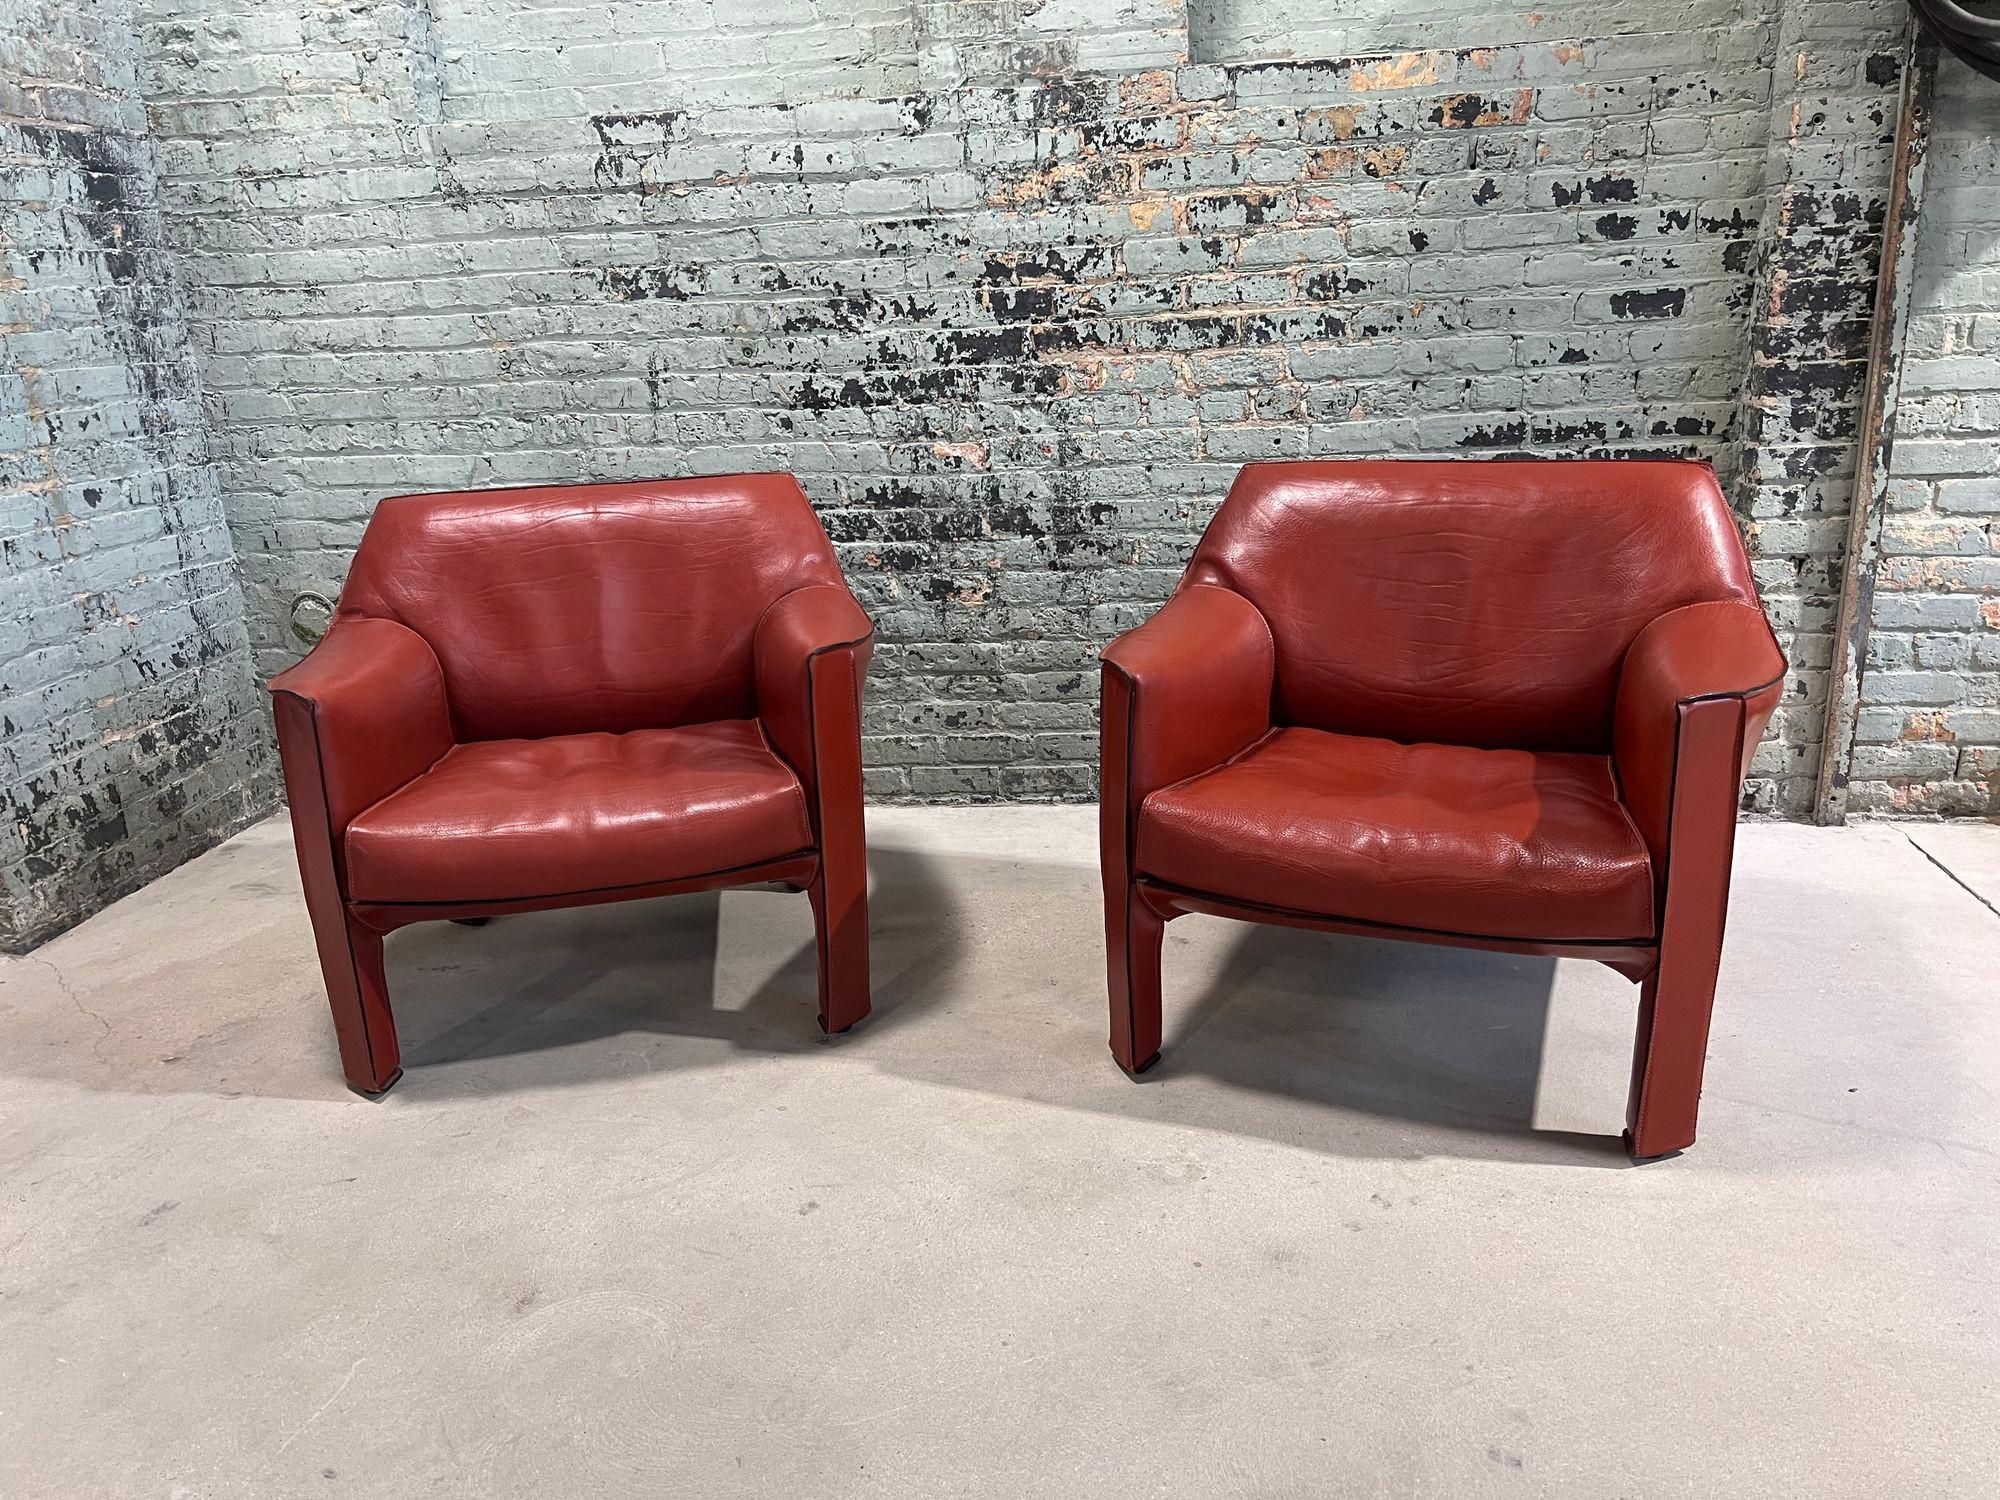 Post-Modern Mario Bellini Pair Leather Cab Lounge Chairs, Model 415, Italy 1970 For Sale